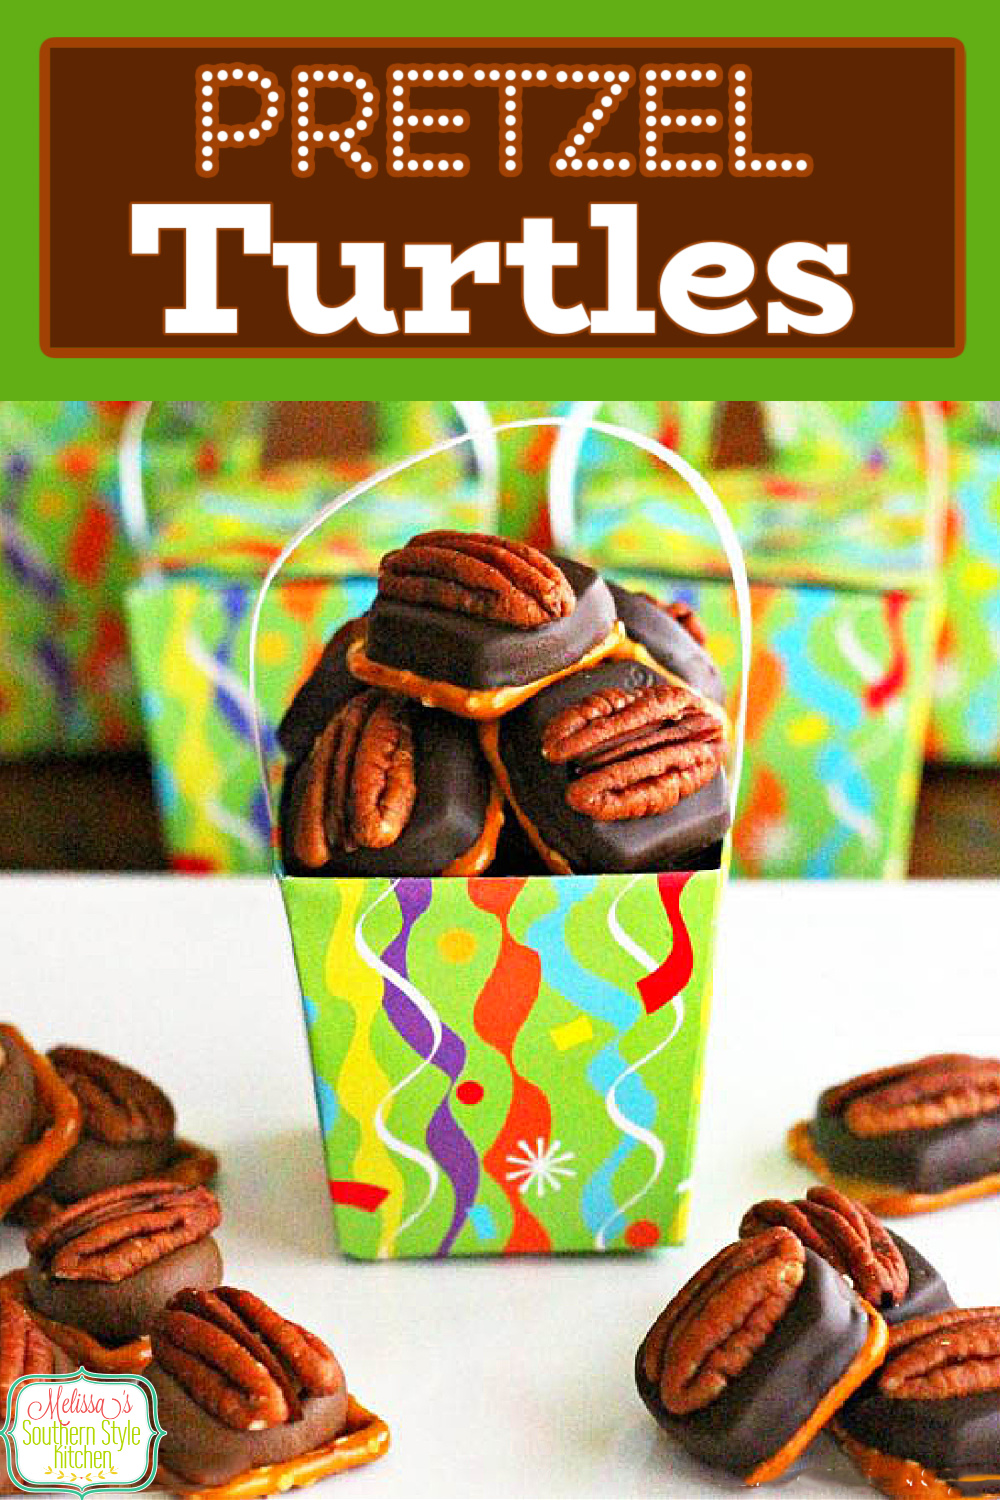 These fun Pretzel Turtles are guaranteed to satisfy your sweet and salty cravings! #pretzelturtles #turtles #caramel #chocolate #pretzels #holidaysweets #holidaybaking #candy #ROLO #desserts #christmascandy #holidayrecipes #christmas #southerrecipes #southernfood #desserts #dessertfoodrecipes via @melissasssk